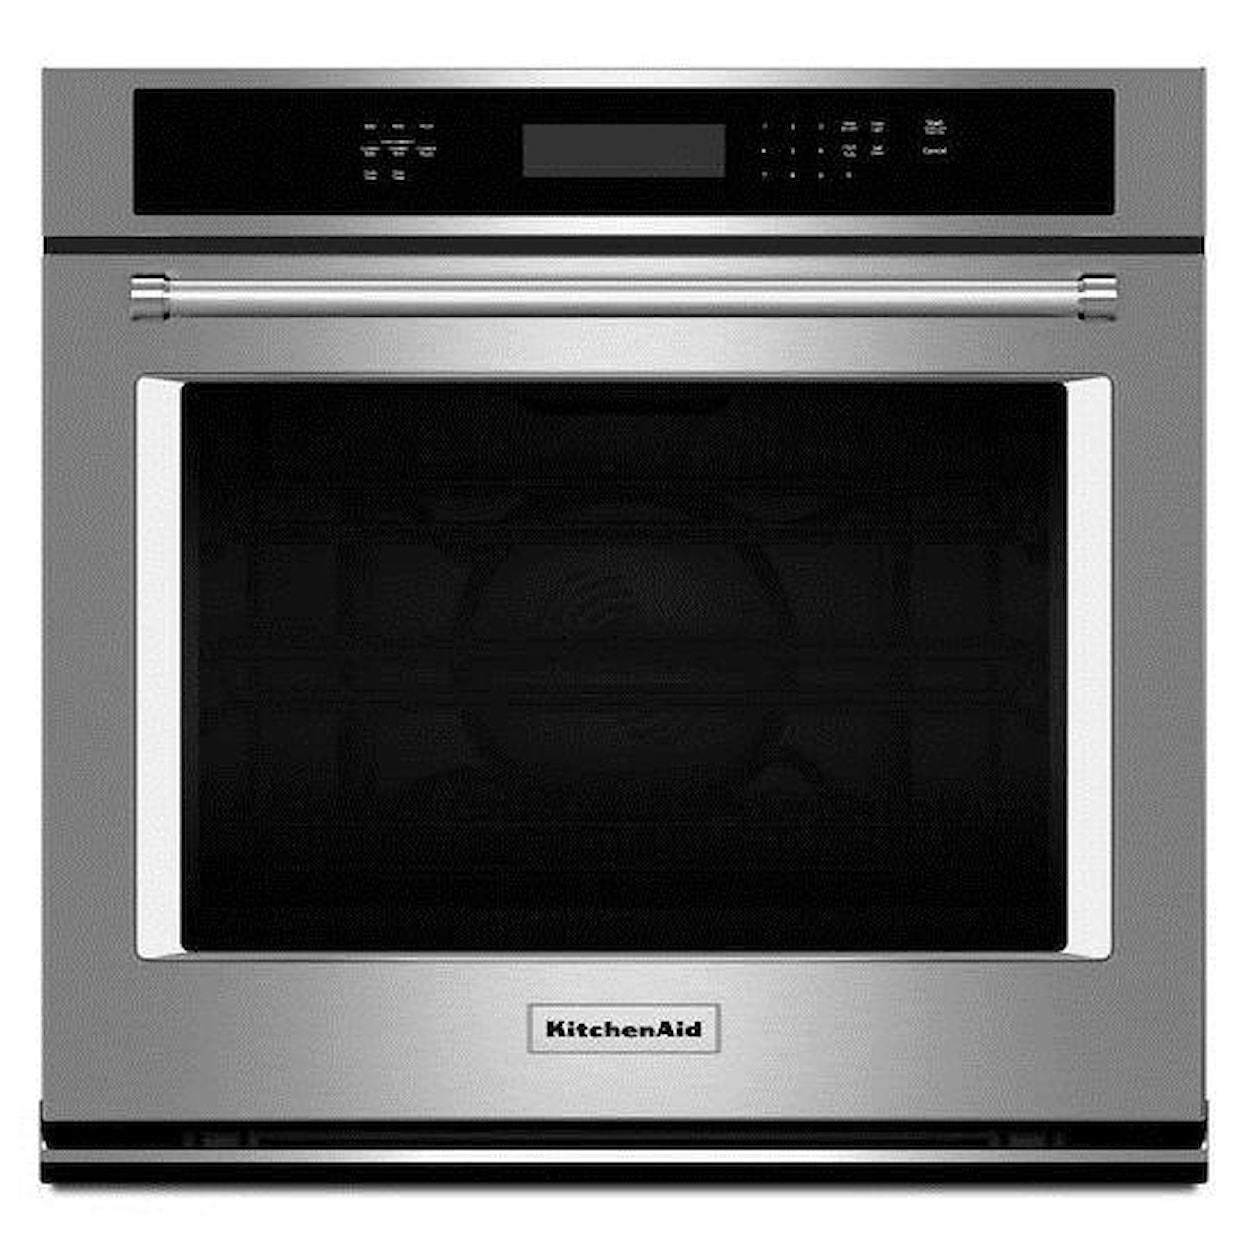 KitchenAid Built-In Electric Single Oven 30" 5 cu. ft. Single Wall Oven